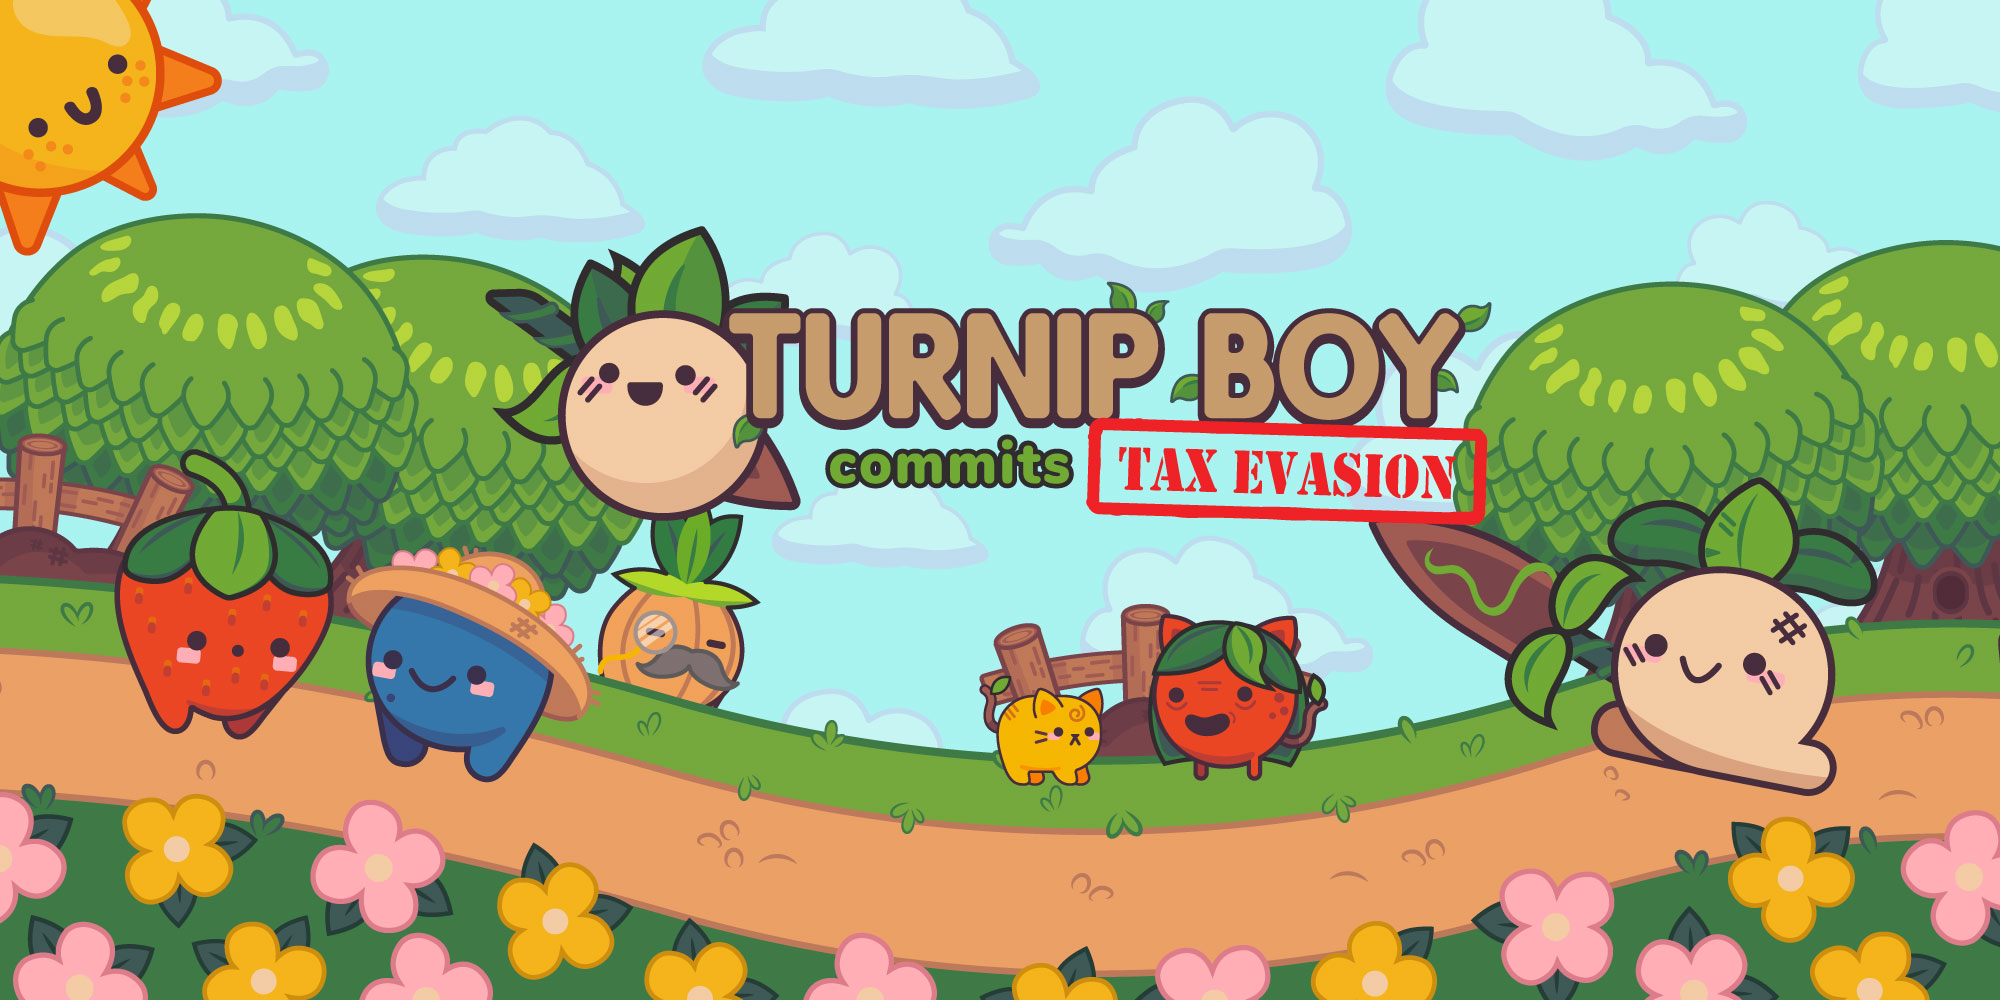 Tax Evading Turnip Boy Is Star Of New Video Game't Mess With Taxes